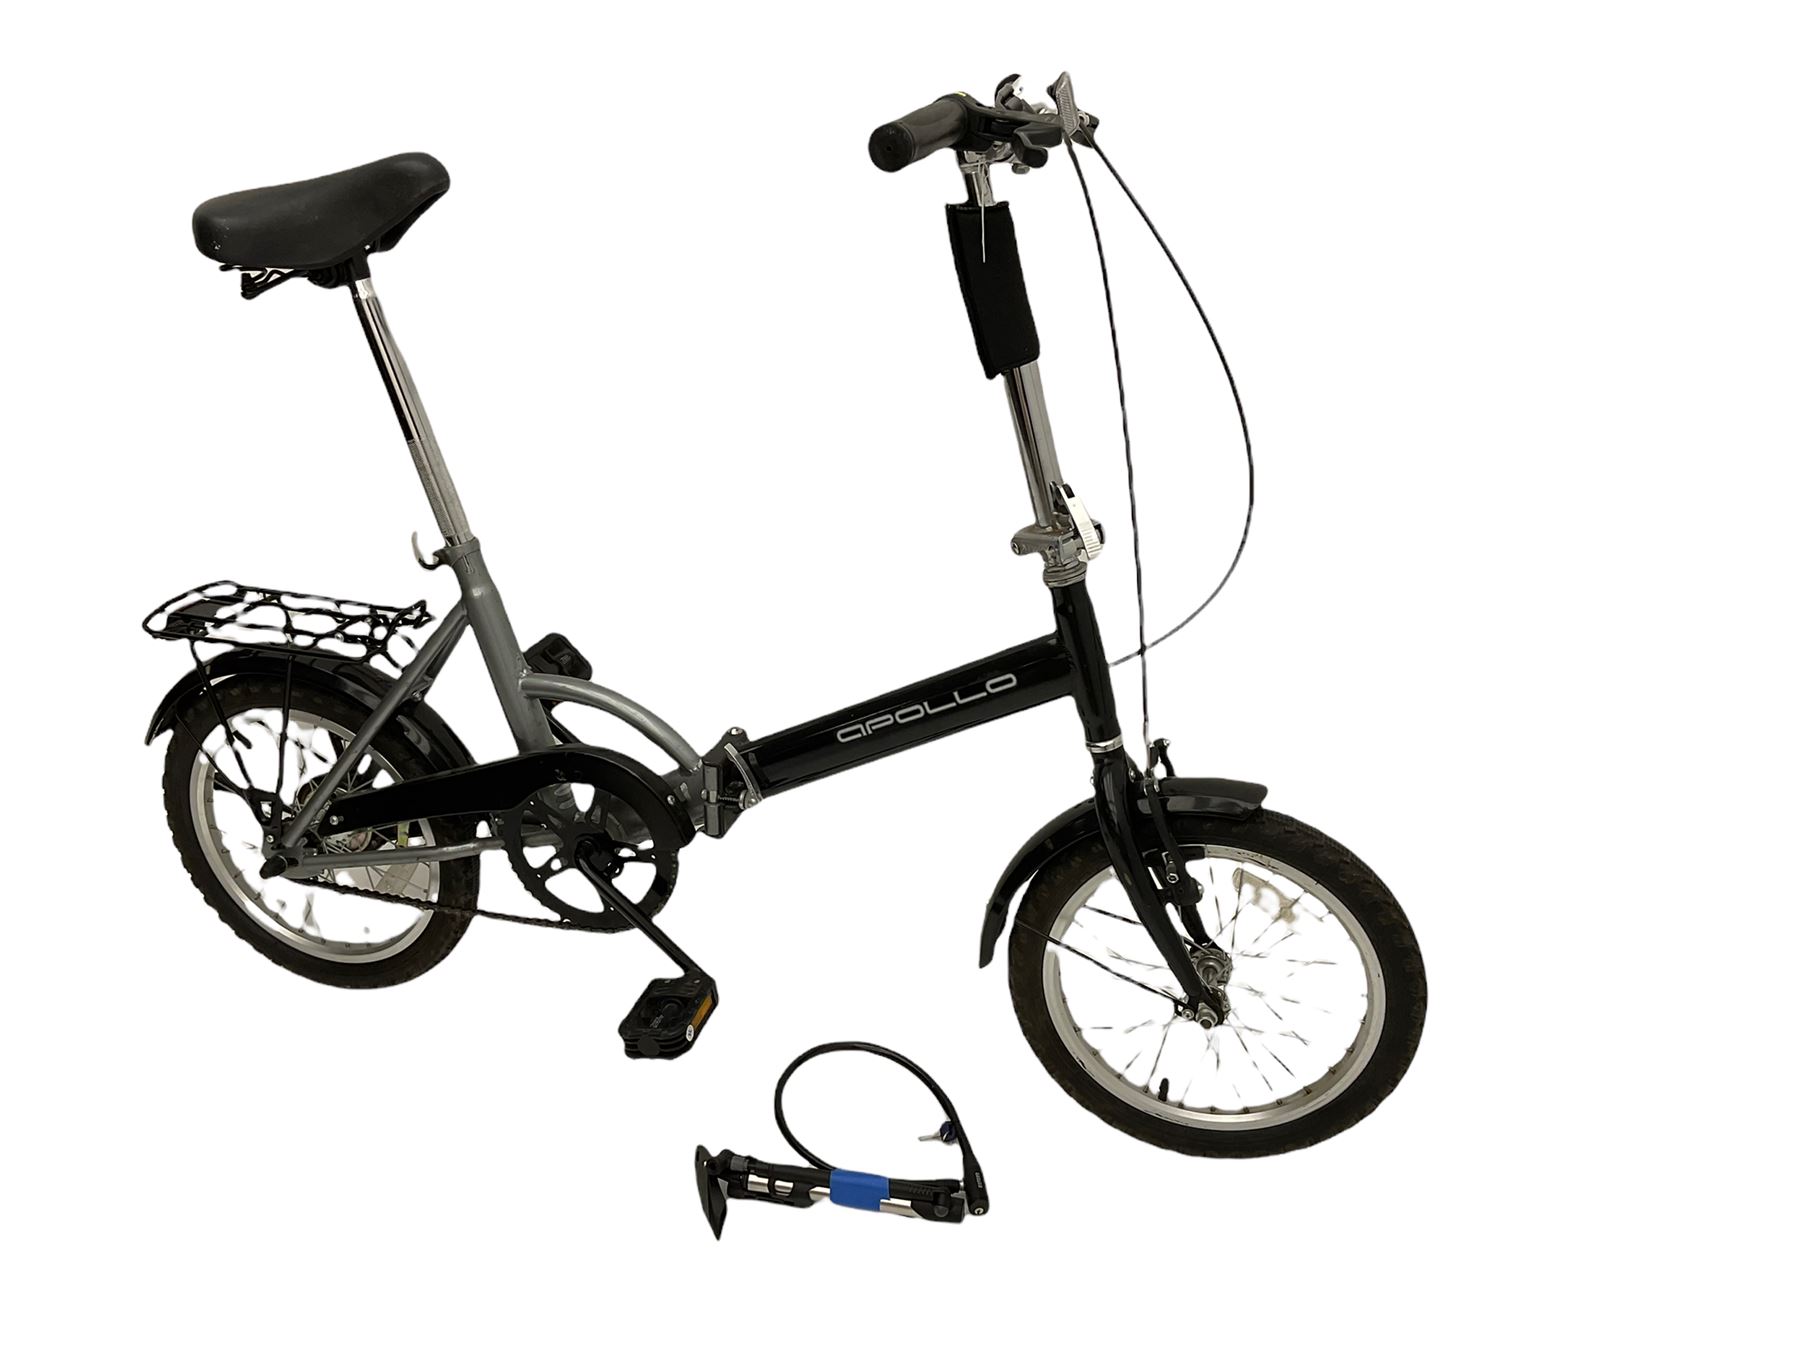 Apollo folding bicycle with hand pump and lock. - THIS LOT IS TO BE COLLECTED BY APPOINTMENT FROM DU